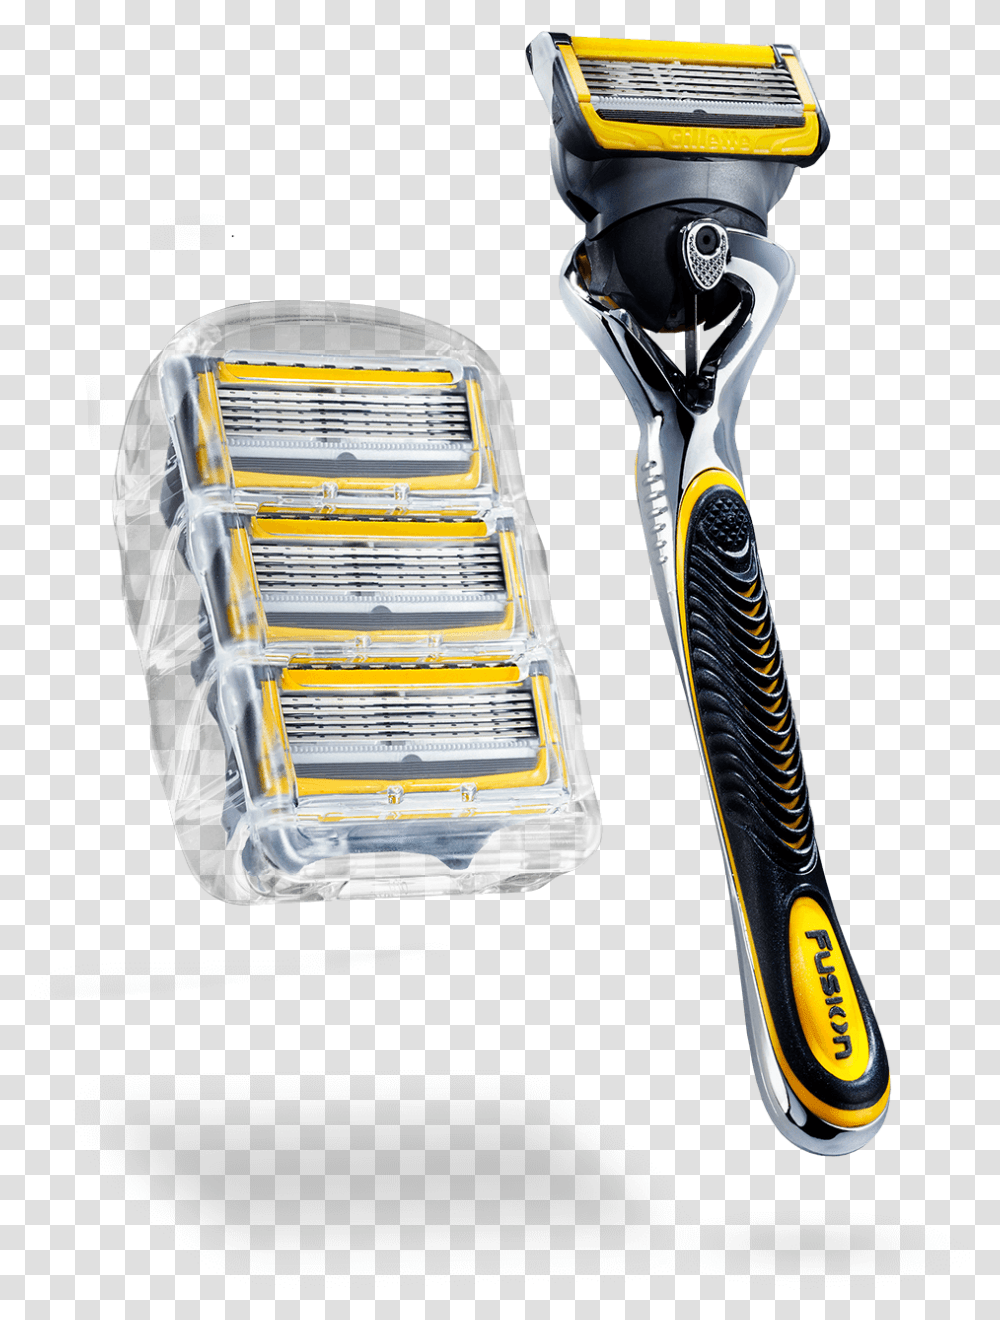 Gillette Free Download Gambar Razor Blade Gillette, Weapon, Weaponry Transparent Png